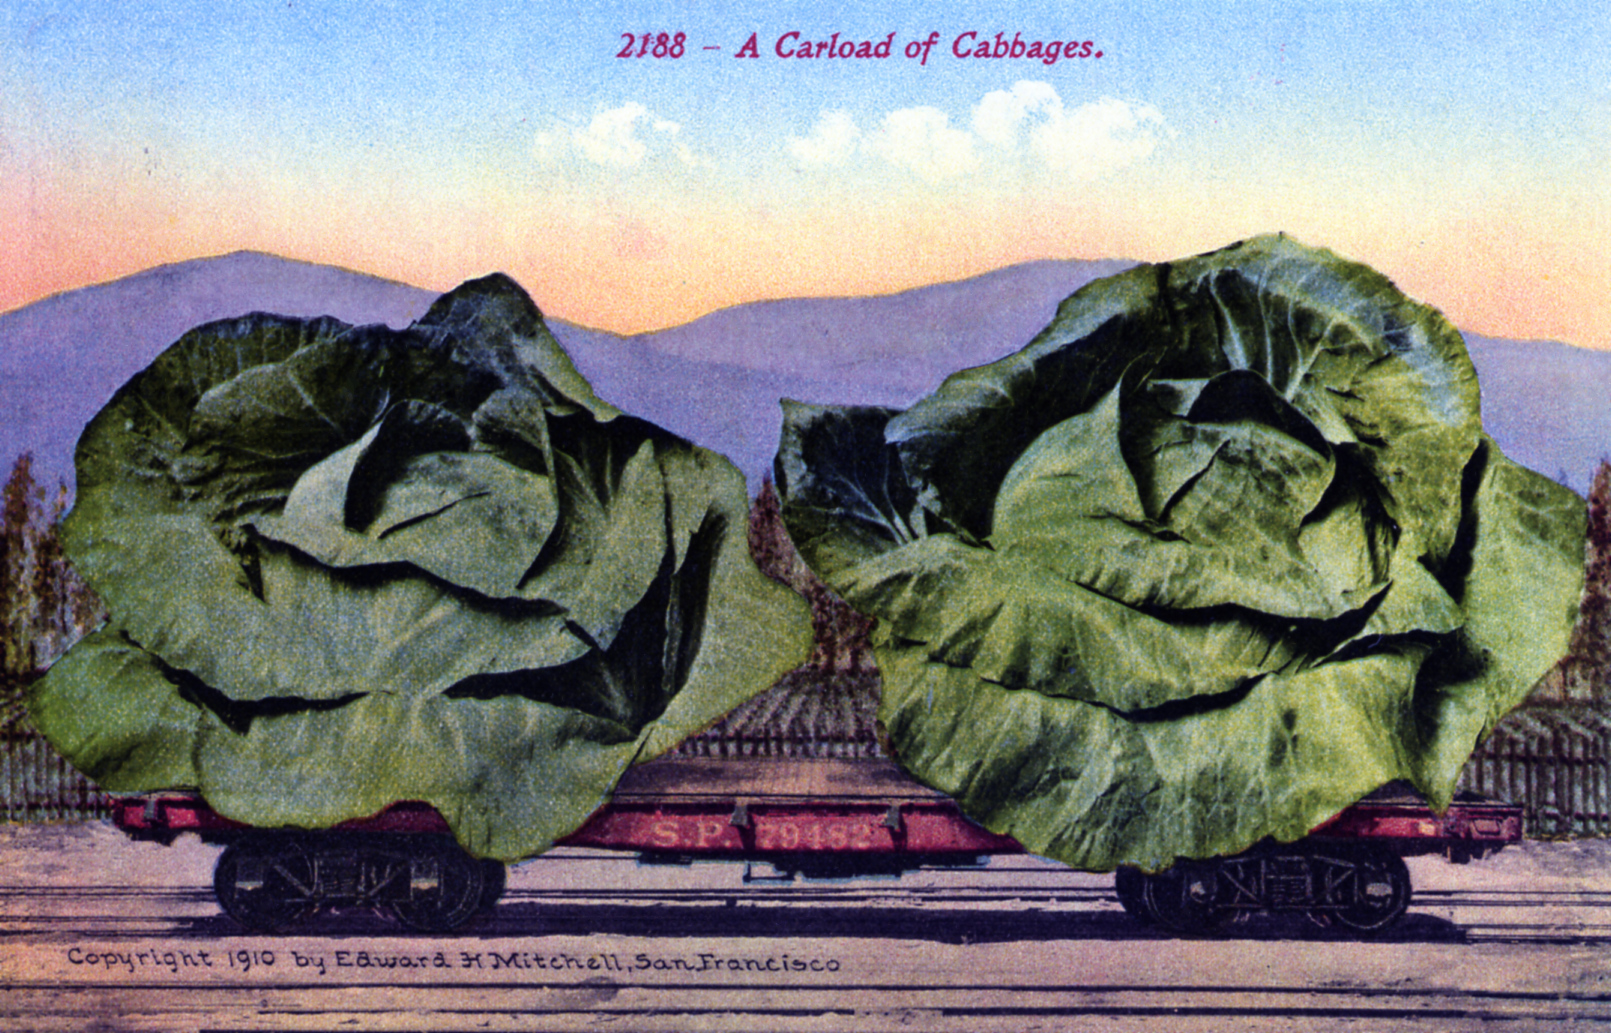 A Carload of Cabbages San Francisco CA published by Edward H. Mitchell, San Francisco, California, 1910